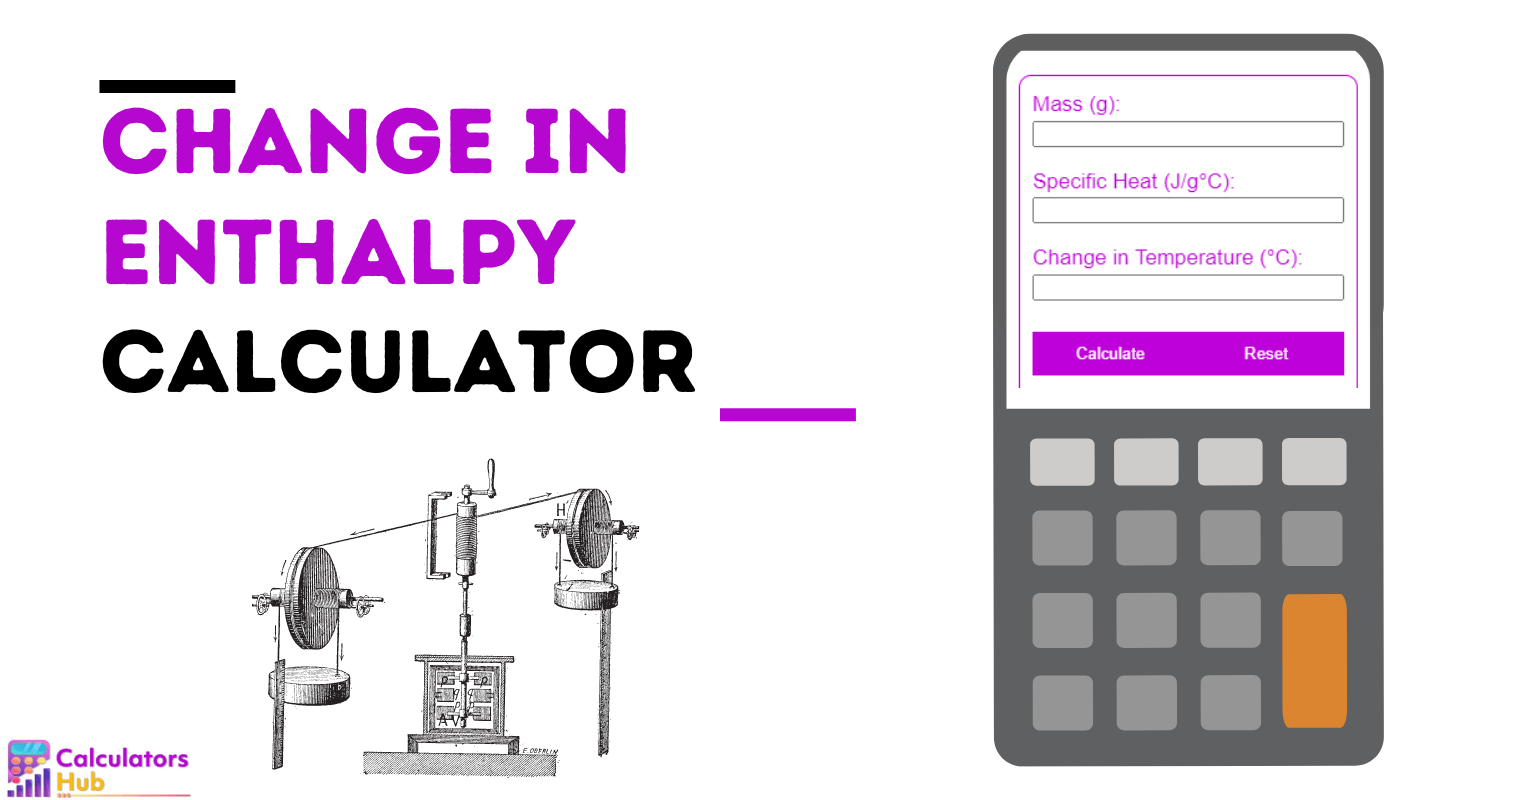 Change in Enthalpy Calculator